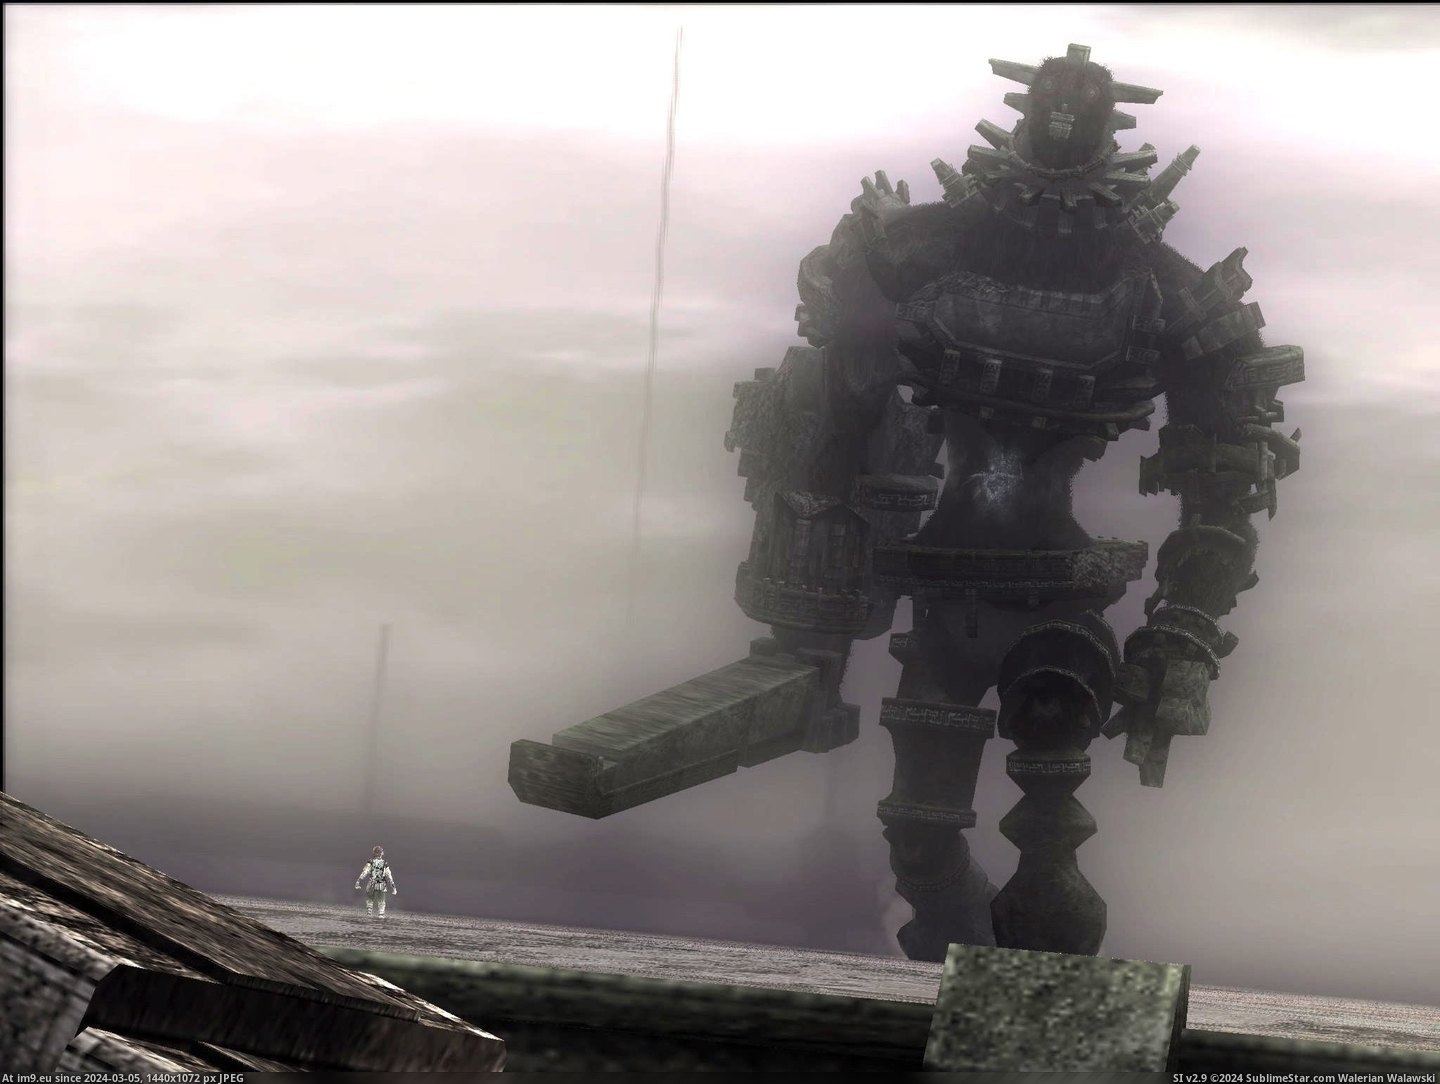 #Game #Shadow #Colossus #Video Video Game Shadow Of The Colossus 5657 Pic. (Obraz z album Games Wallpapers))